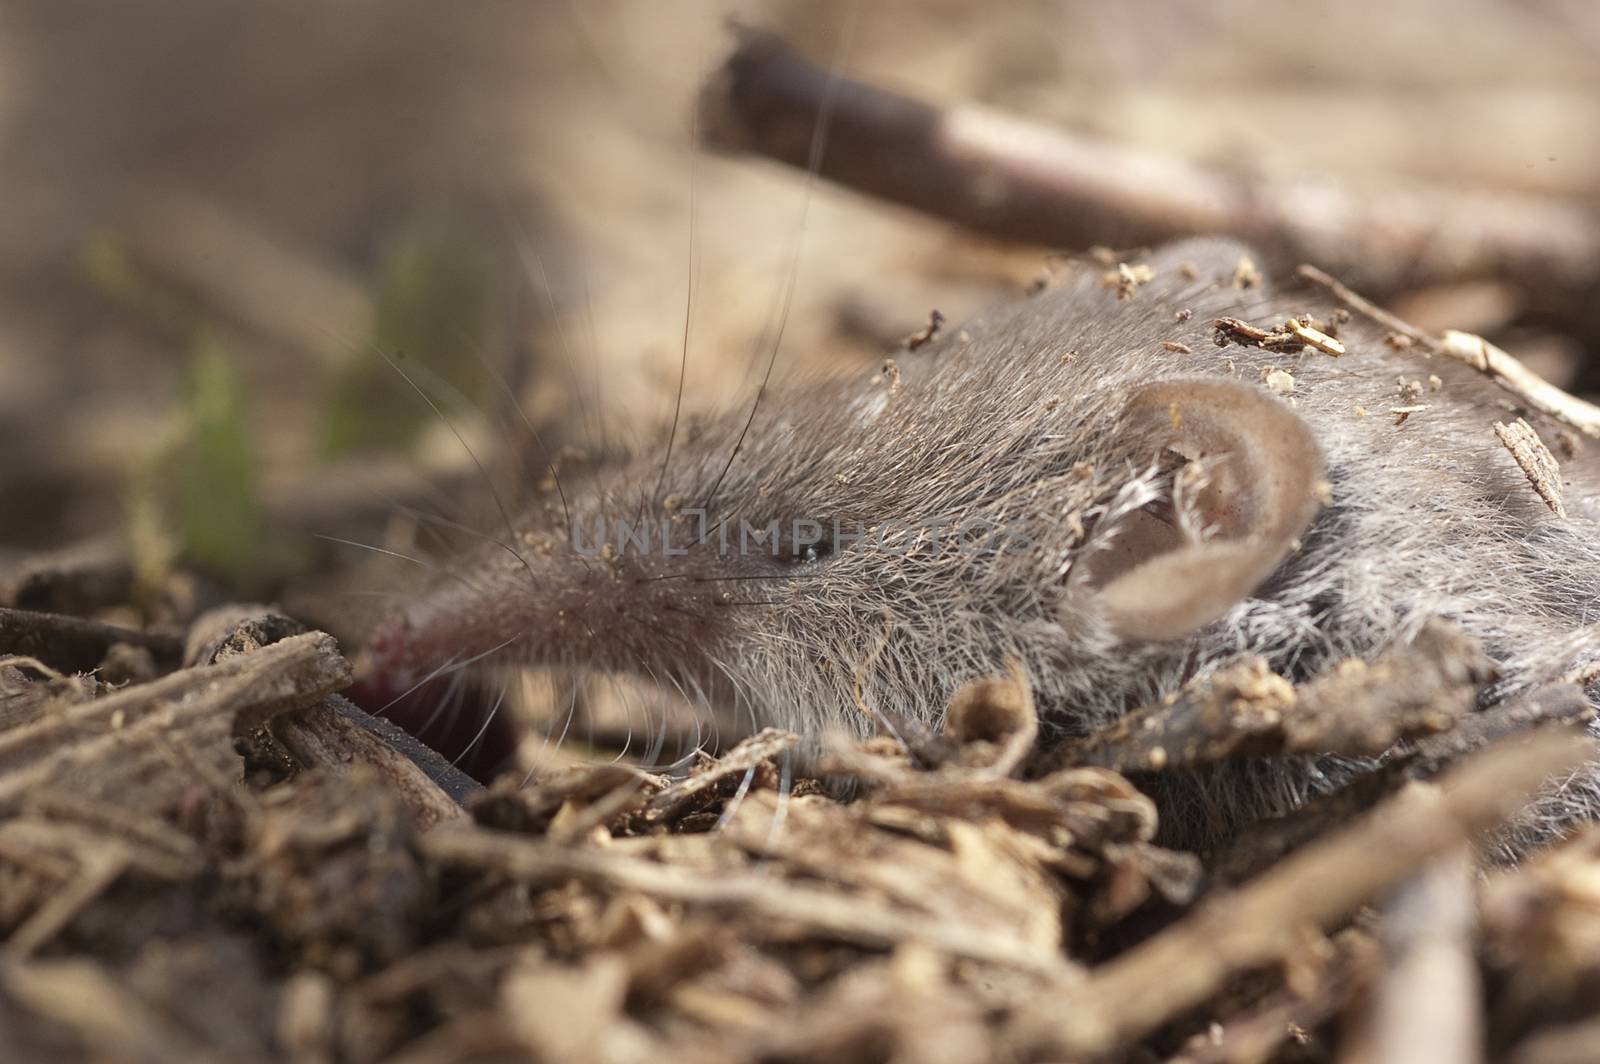 Greater shrew with white teeth (Crocidura russula) coming out of by jalonsohu@gmail.com